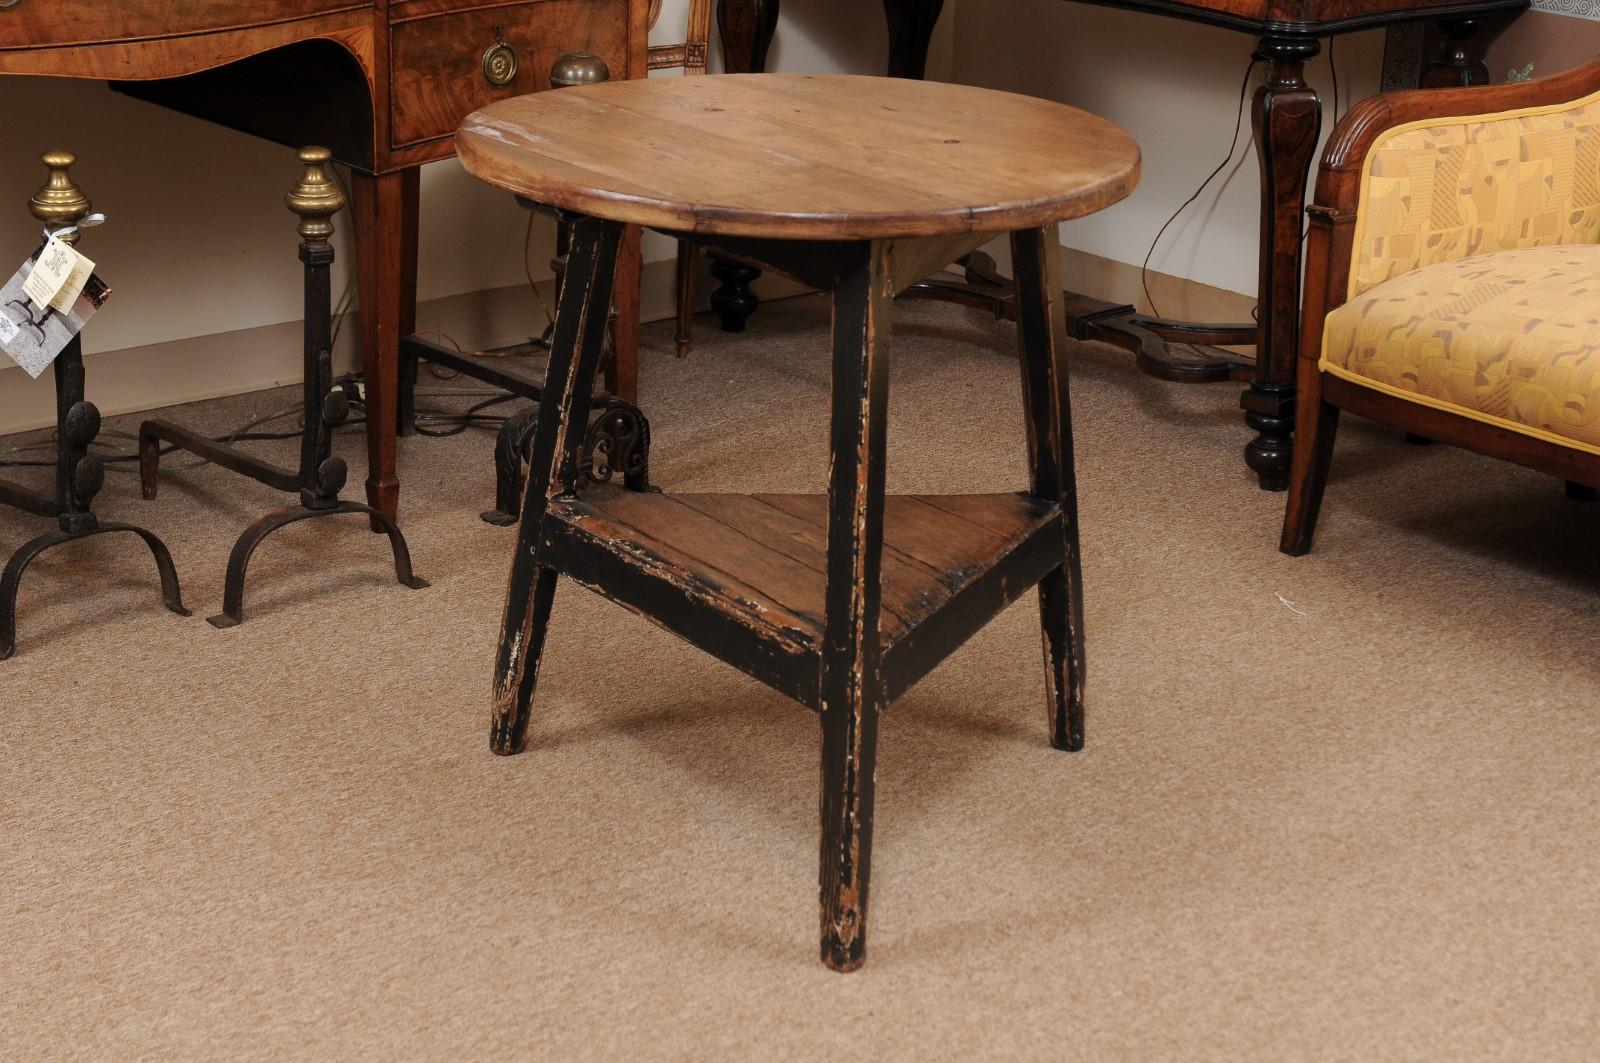 An English round pine and black painted cricket table with lower shelf.